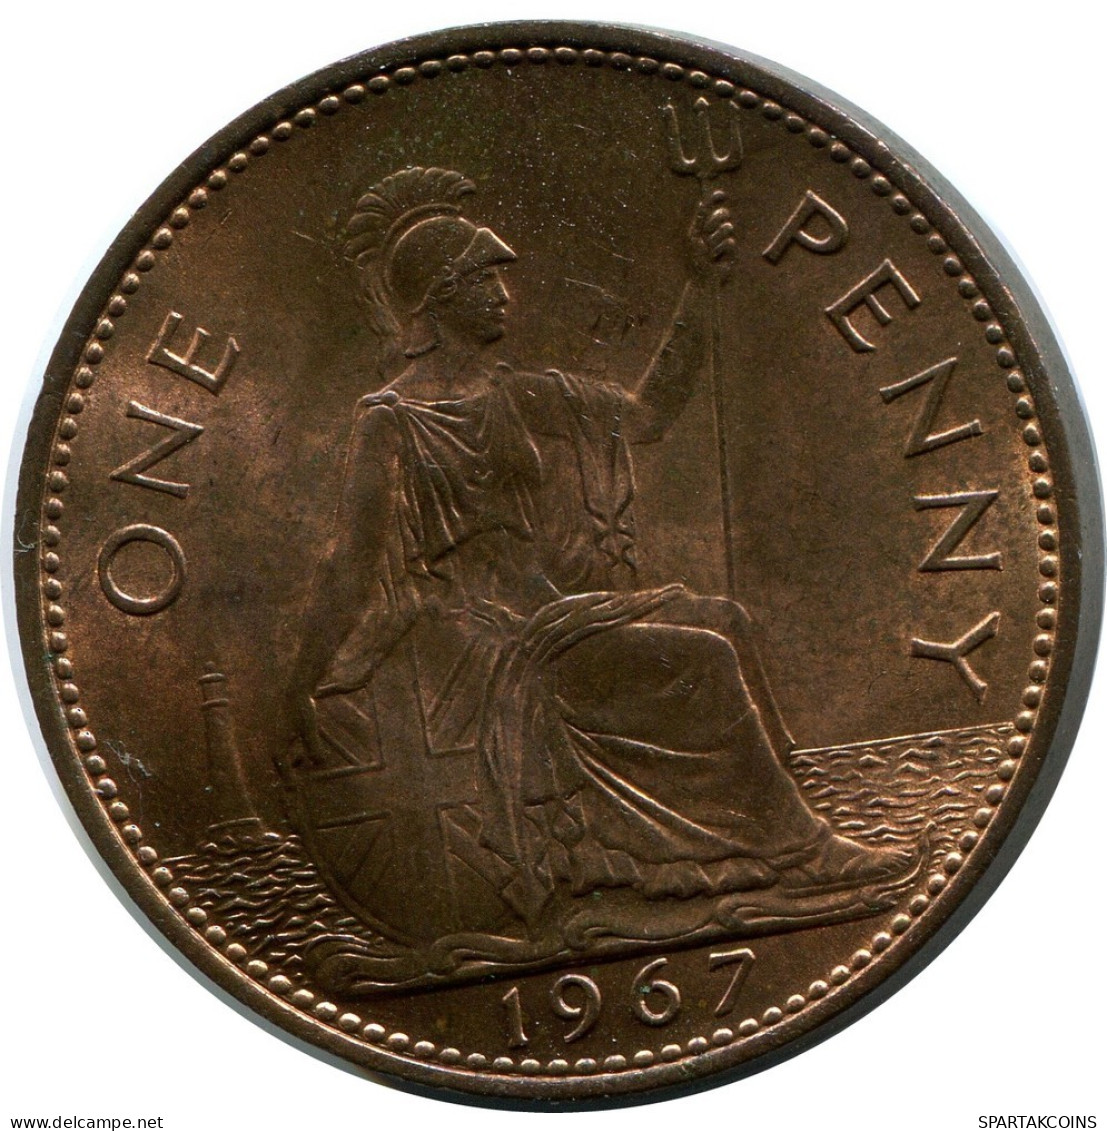 PENNY 1967 UK GREAT BRITAIN Coin #BB037.U.A - D. 1 Penny